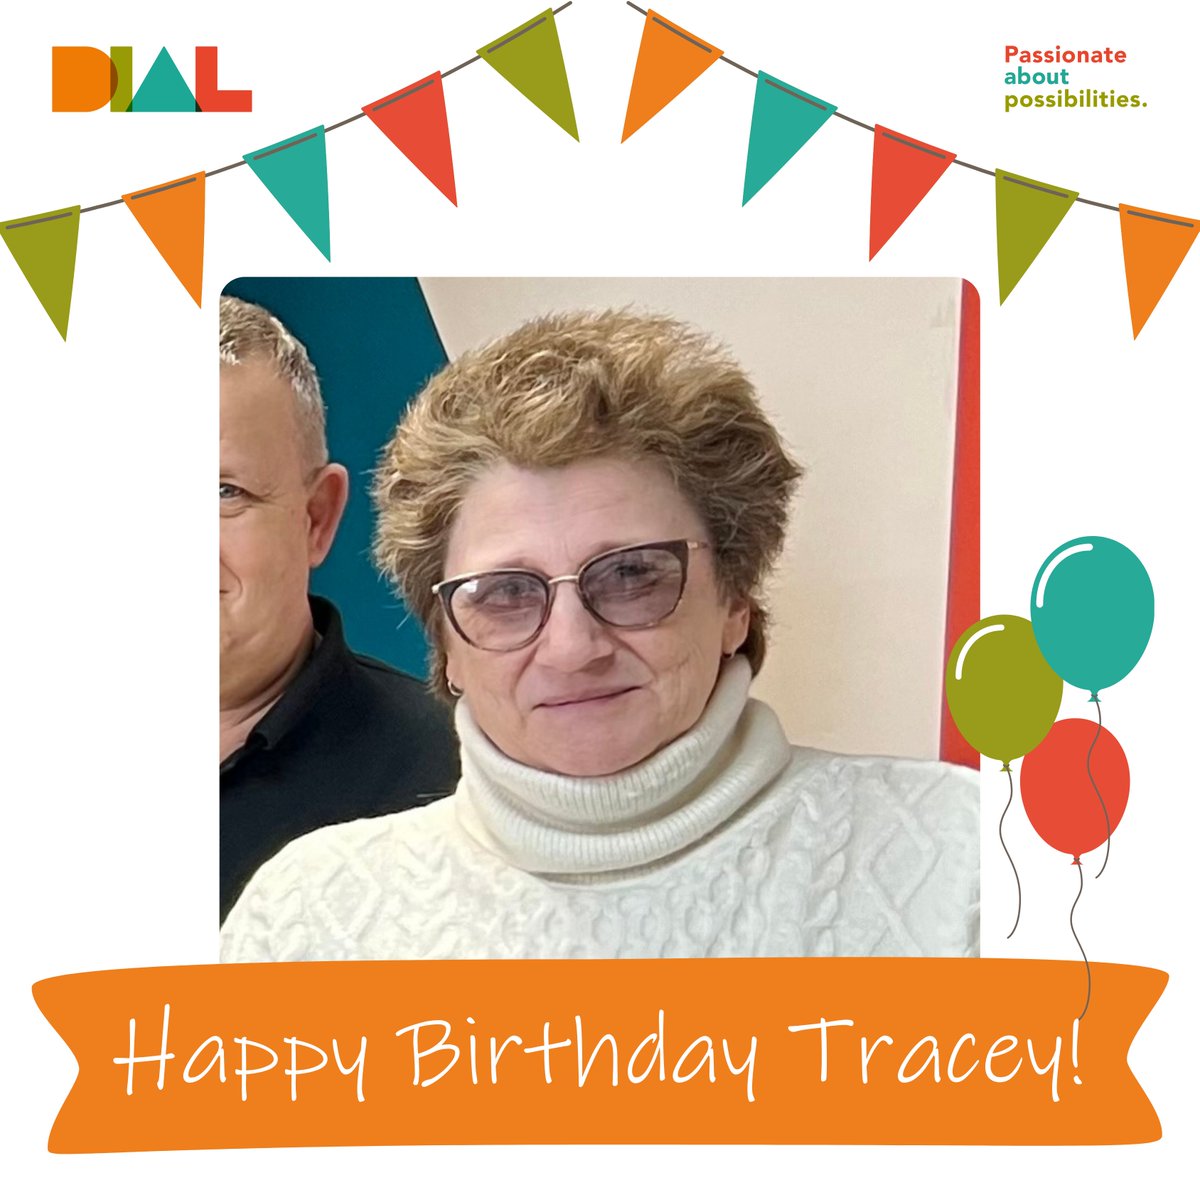 Happy Birthday to our fantastic Peer Advisor, Tracey! We hope that you have a lovely day 🎈 #PassionateAboutPossibilities #HappyBirthday #TeamDIAL